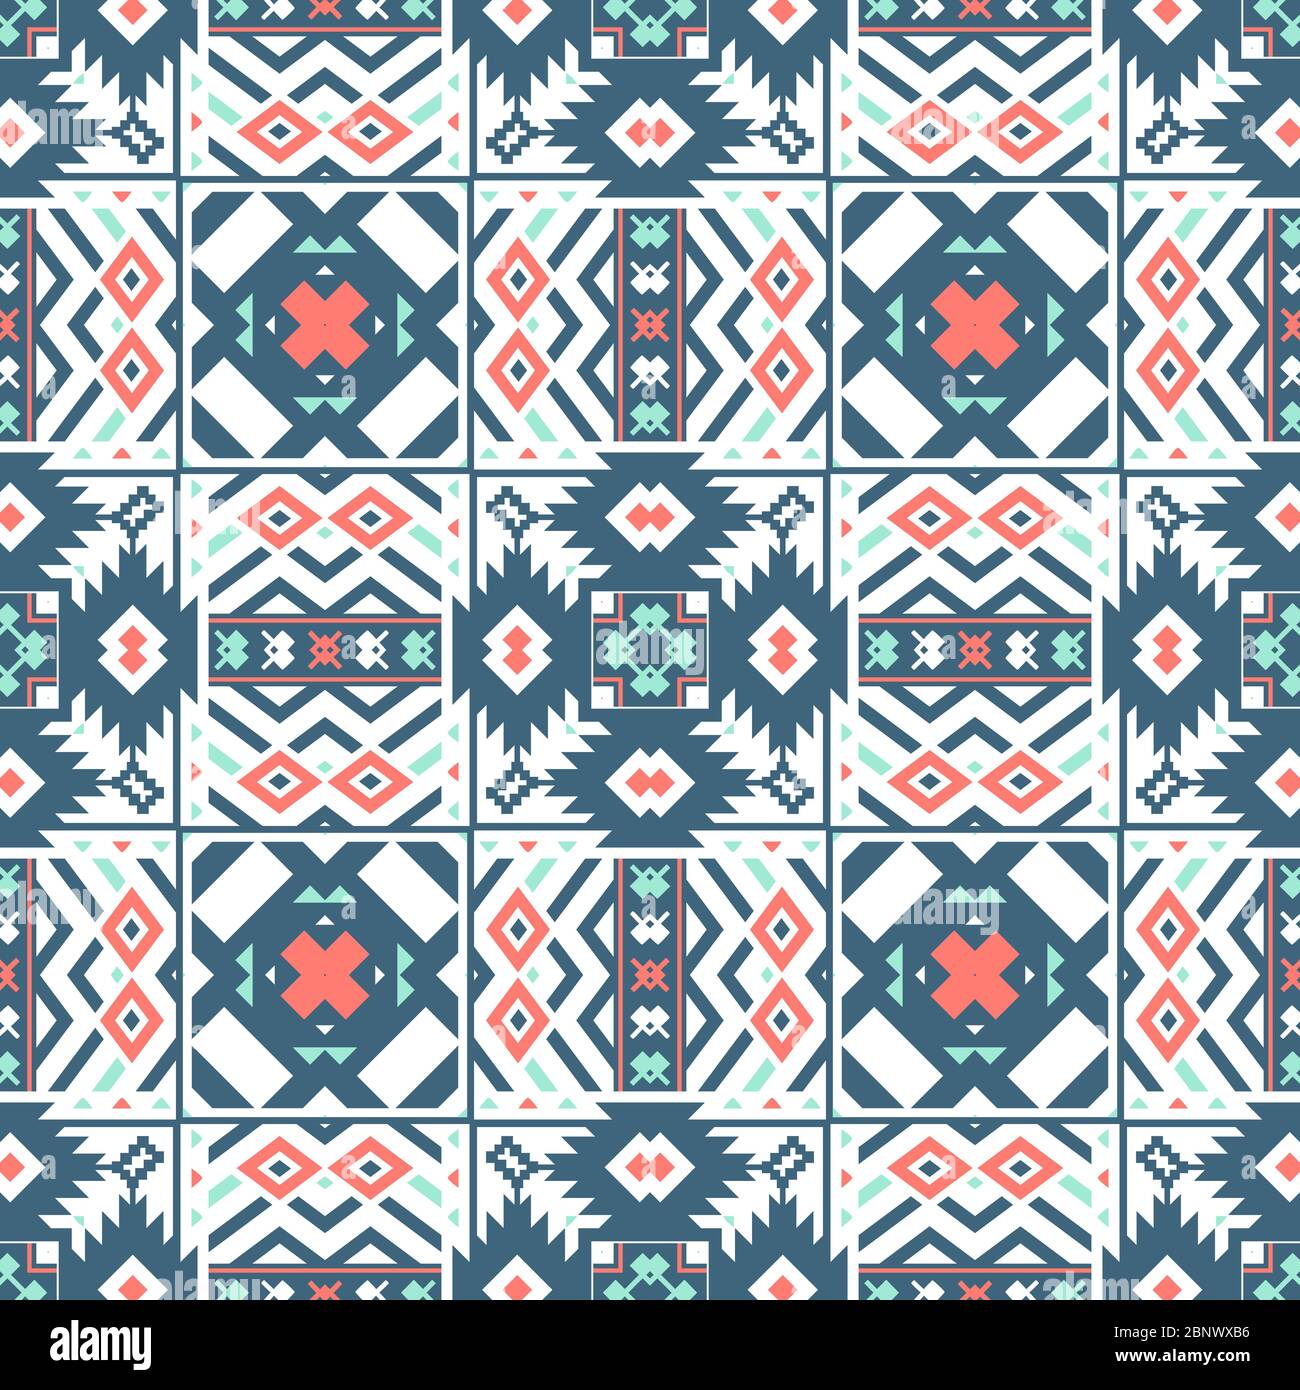 Geometric ethnic oriental seamless pattern traditional Design for background, carpet, wallpaper, clothing, wrapping, Batik, fabric and textile. Stock Photo